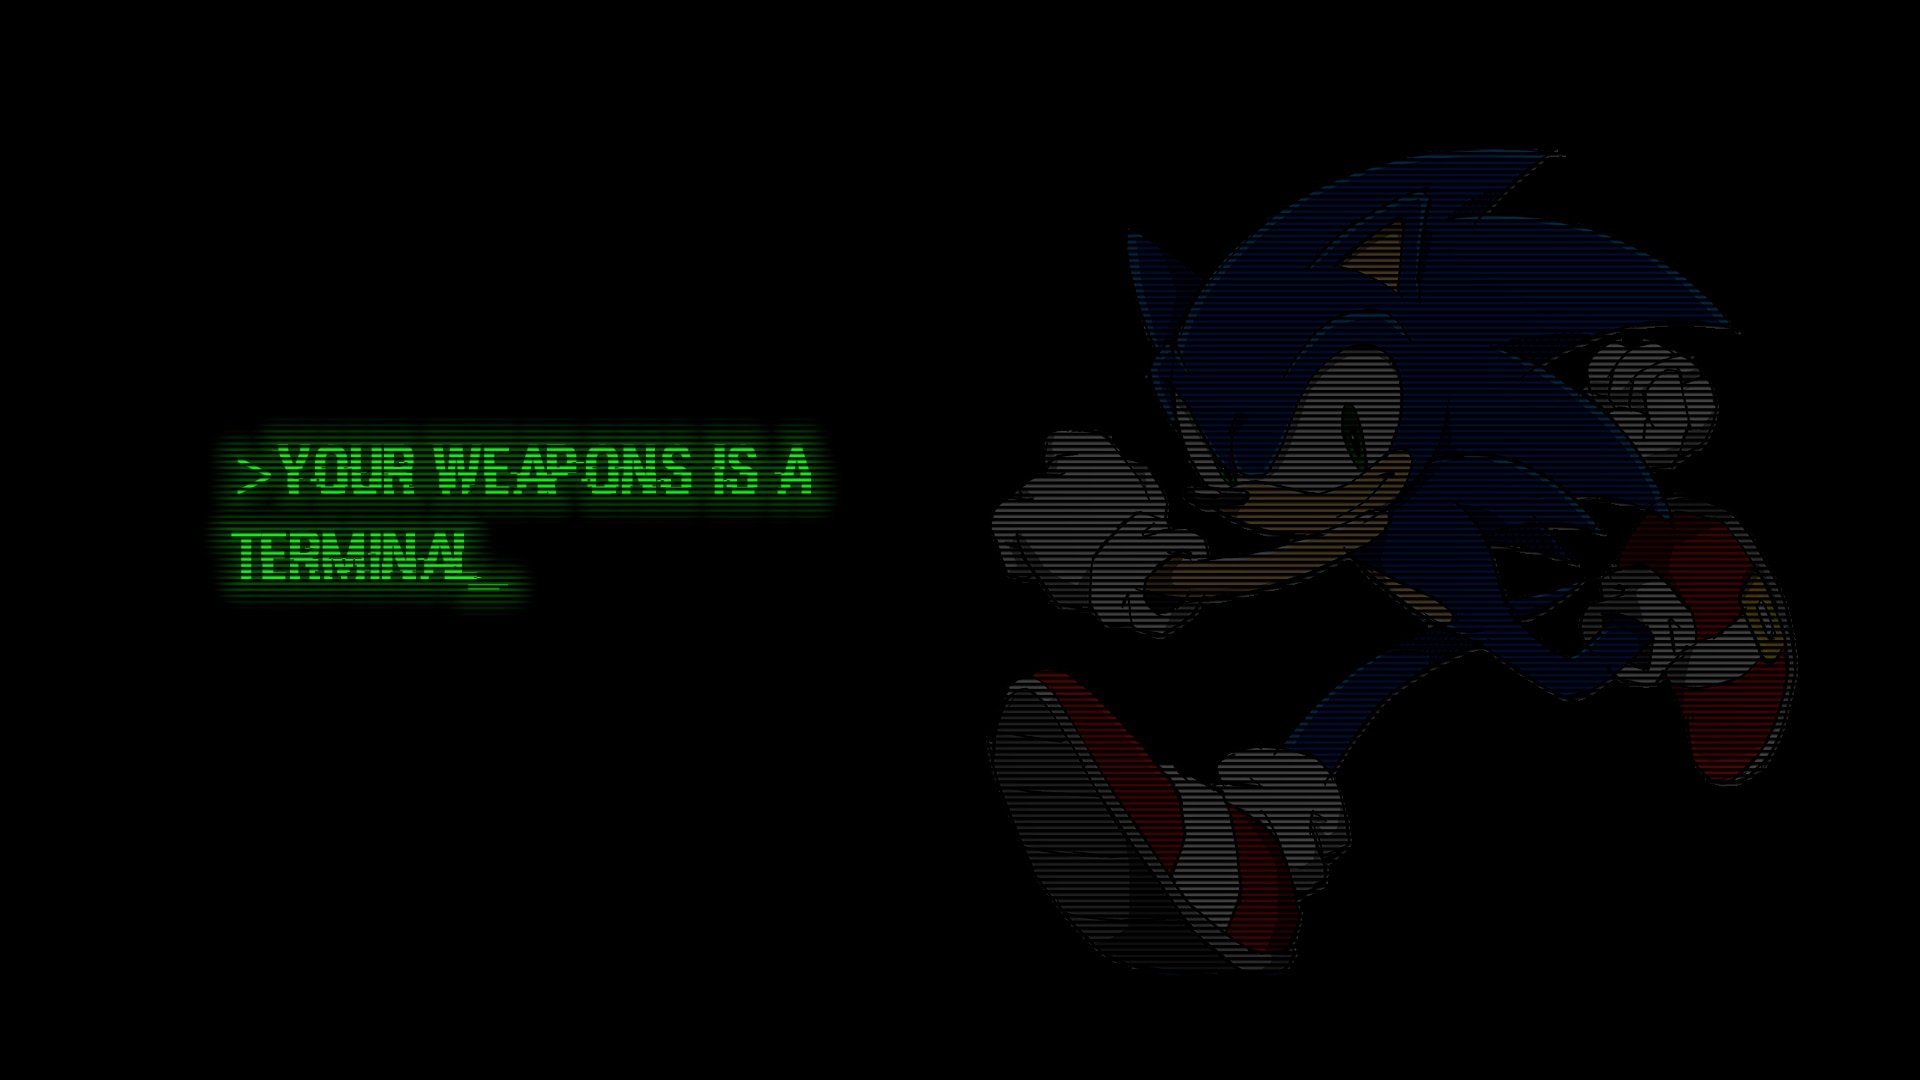 Sonic the Hedgehog (Underground) - Loathsome Characters Wiki